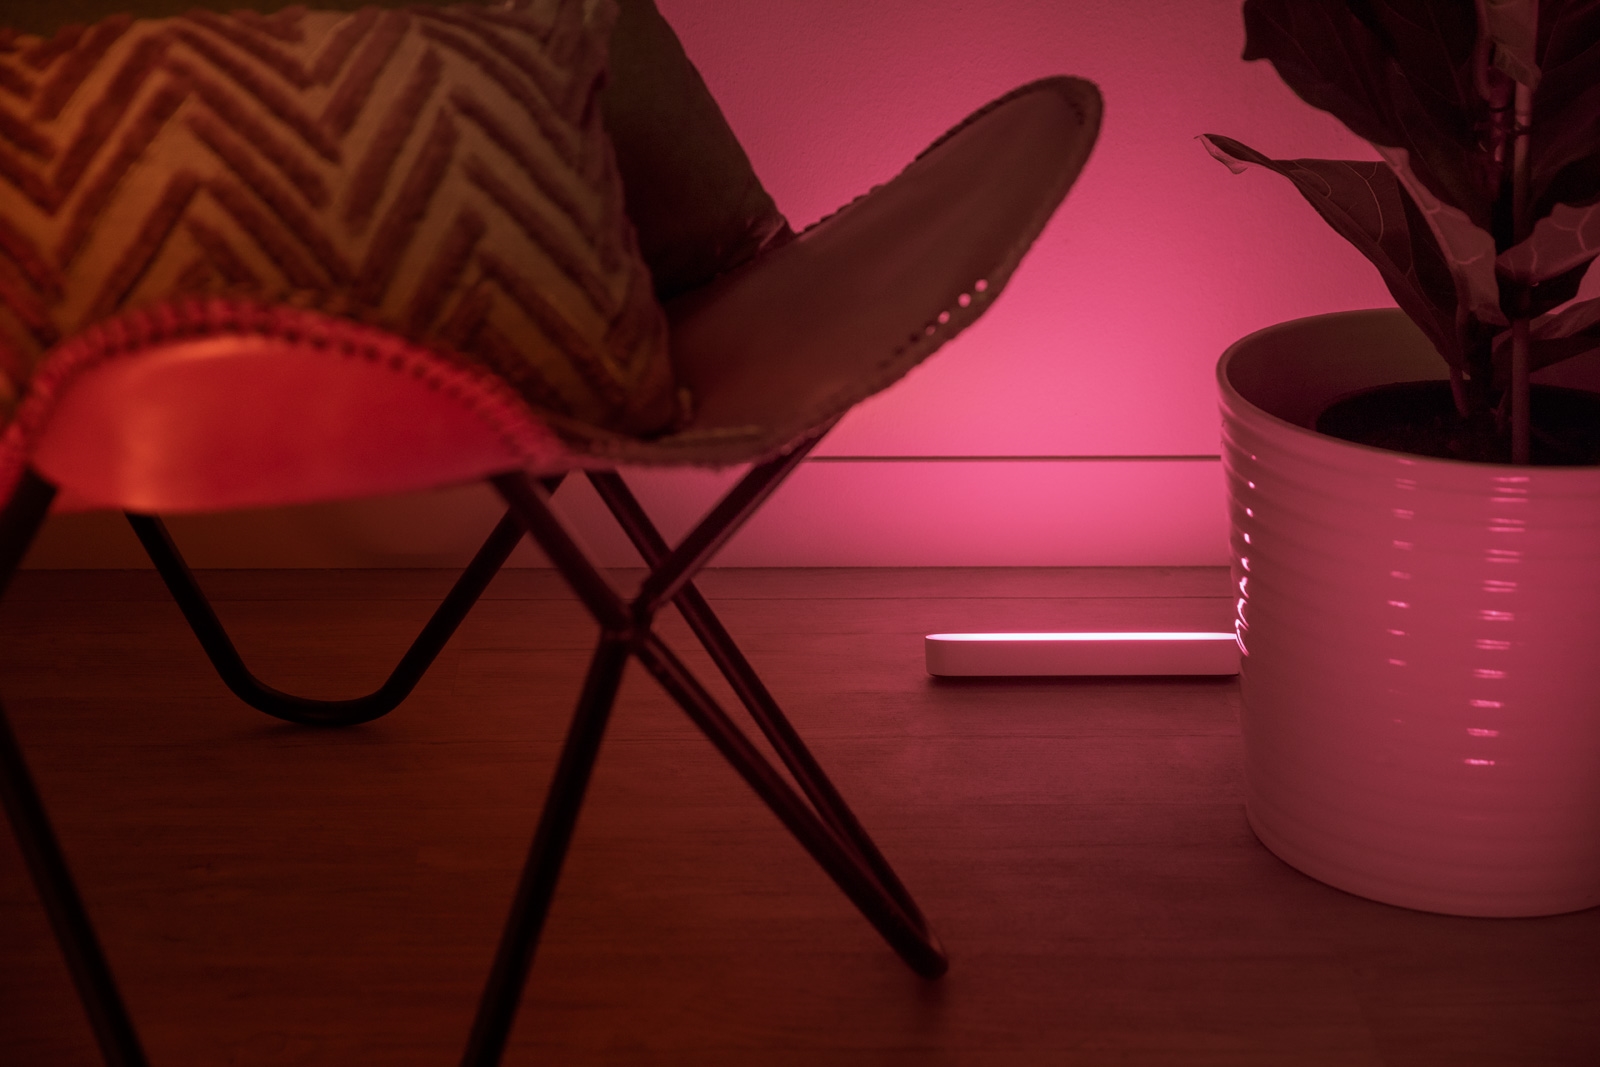 The latest Philips Hue lighting kits bring color to your walls | DeviceDaily.com